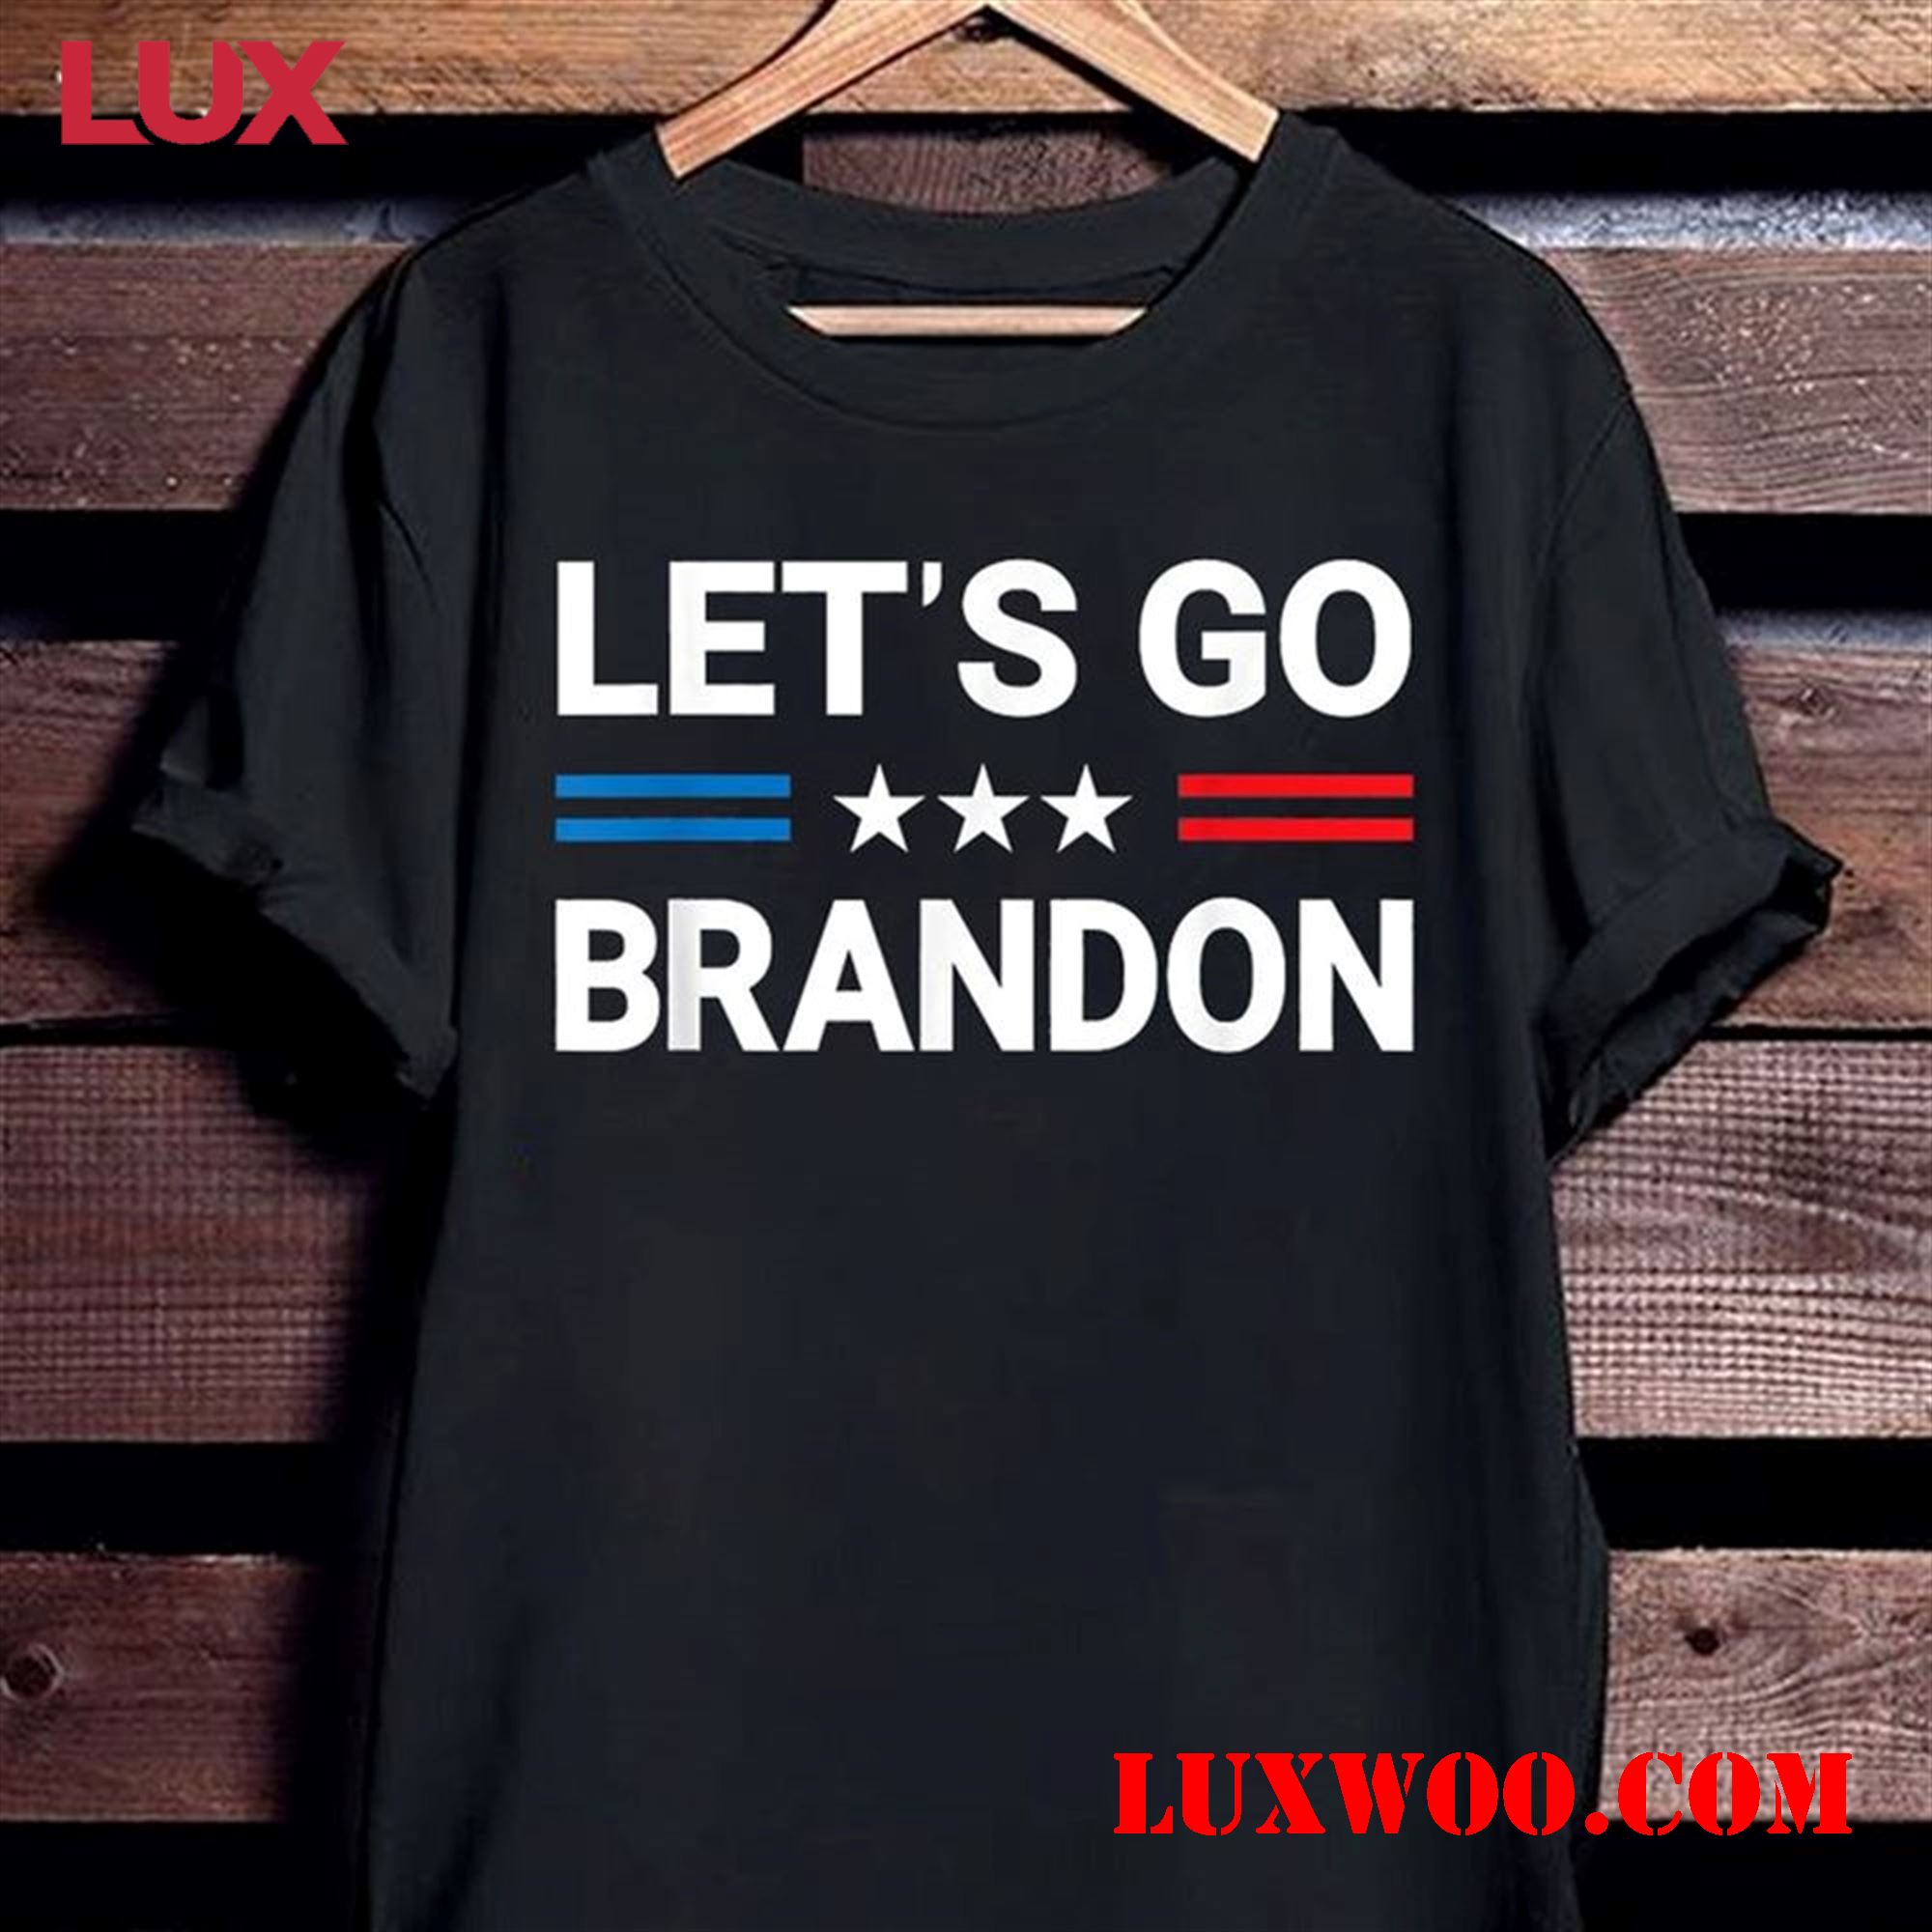 Show Your Support For Conservative Values With Let's Go Brandon Apparel